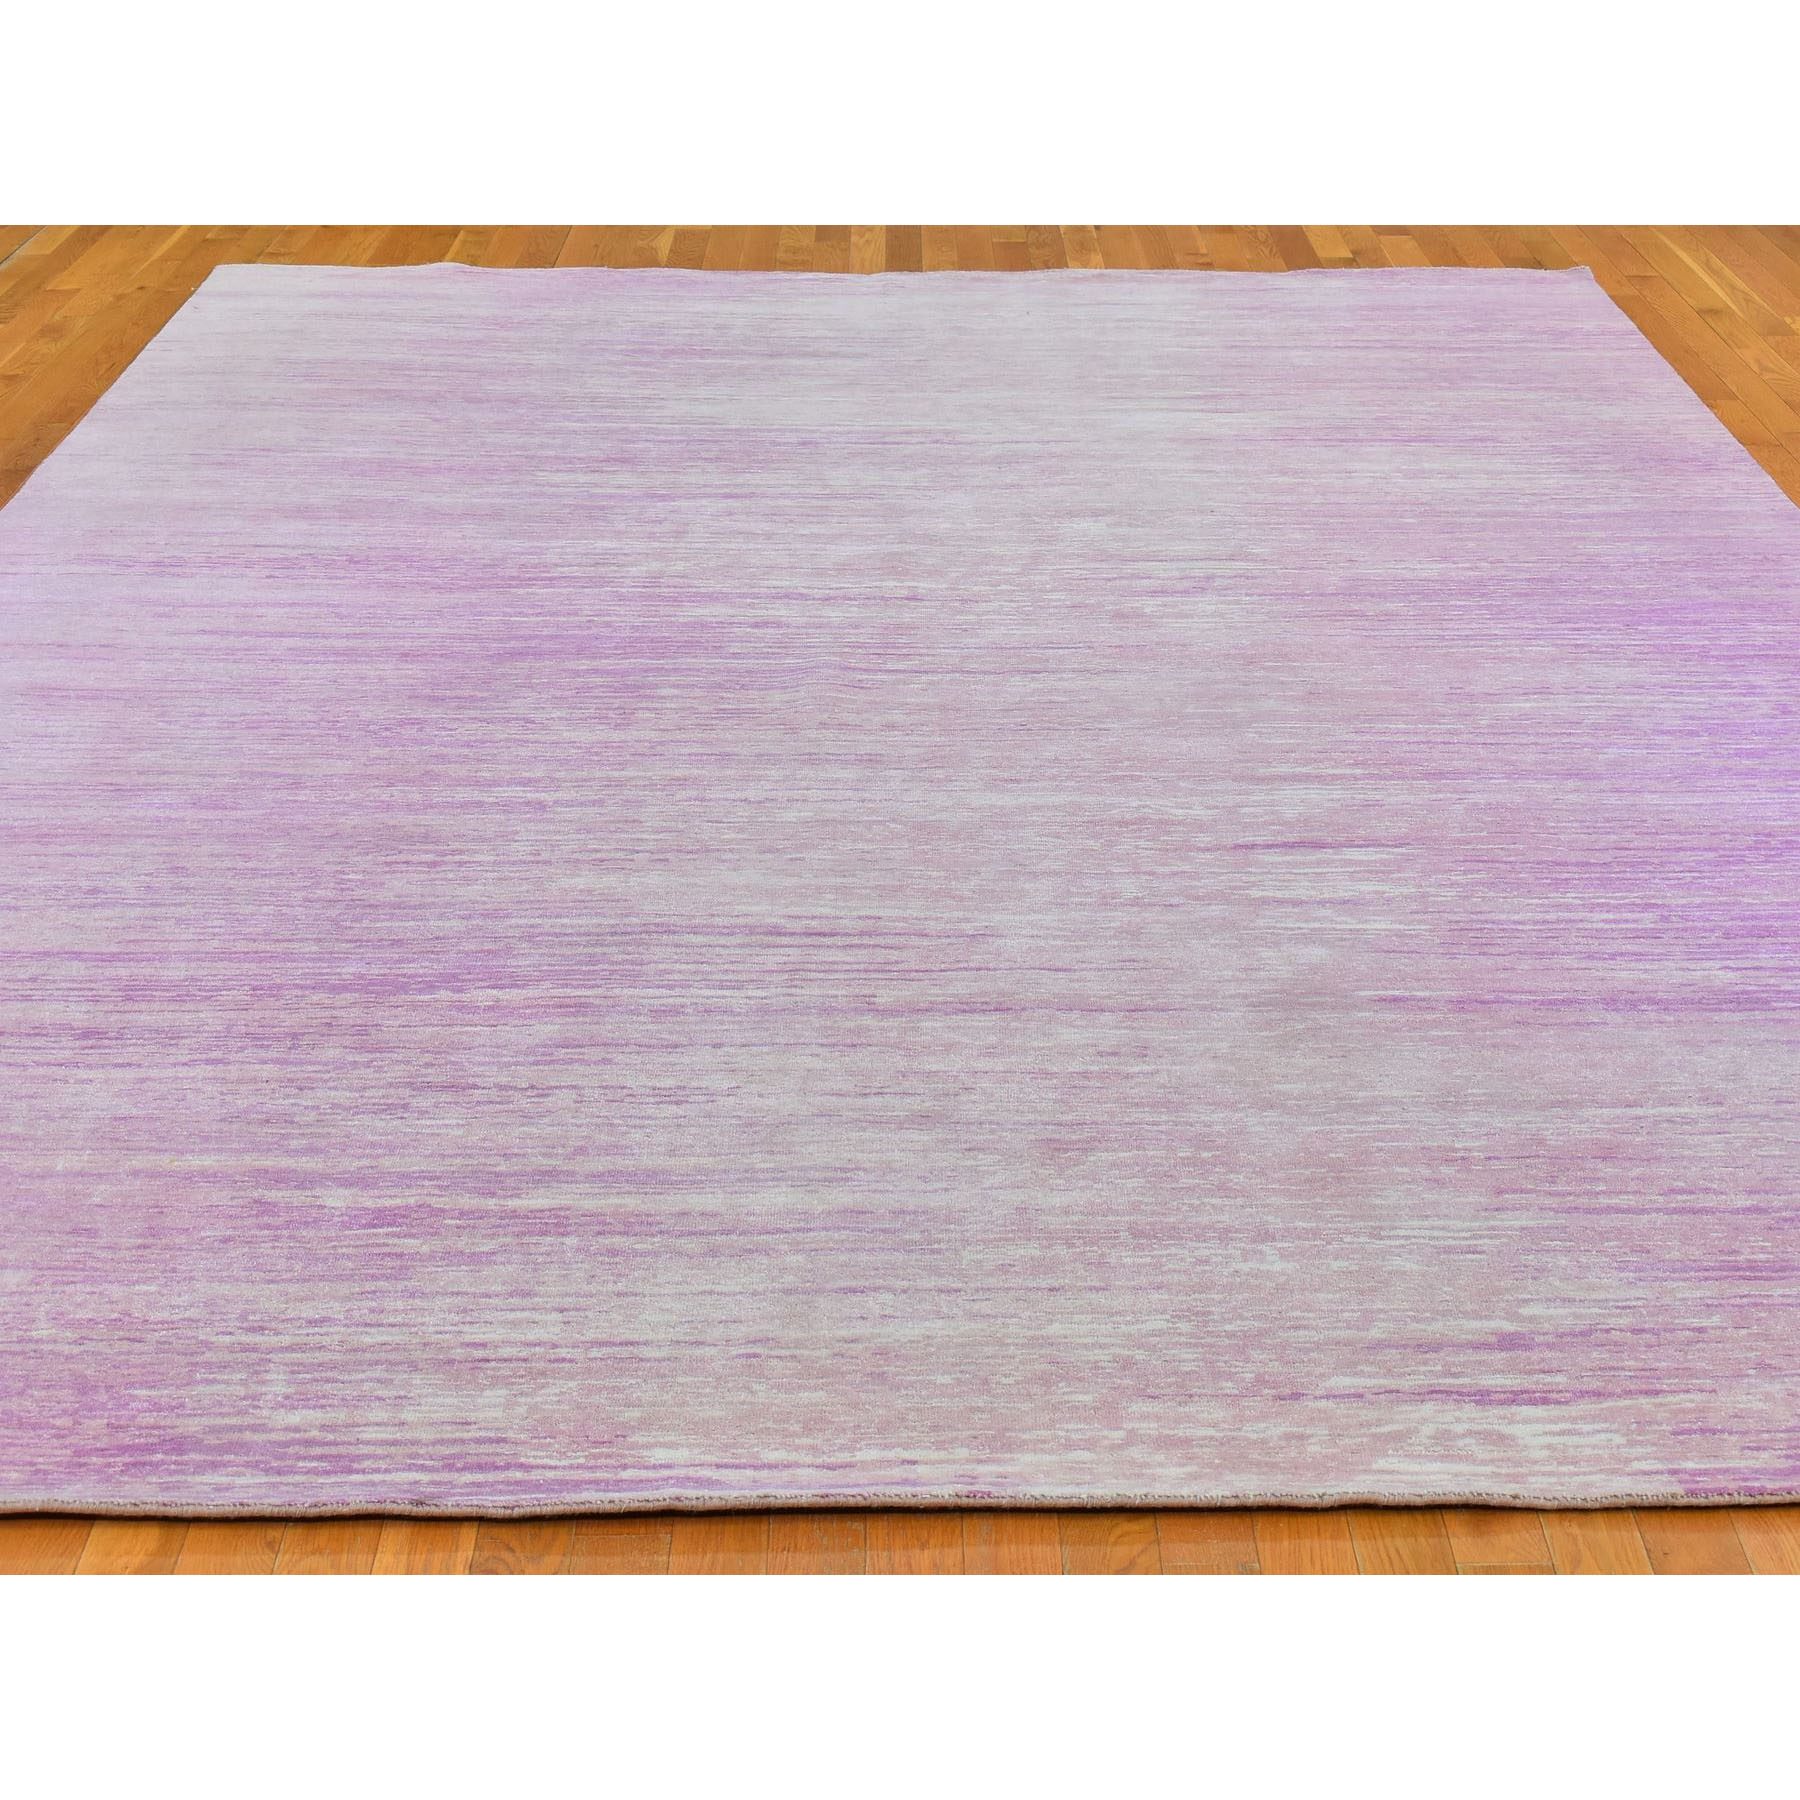 10'x14'2" Zero Pile Pure Wool Only Horizontal Ombre Design Pink with Touches of Ivory Hand Woven Oriental Rug 